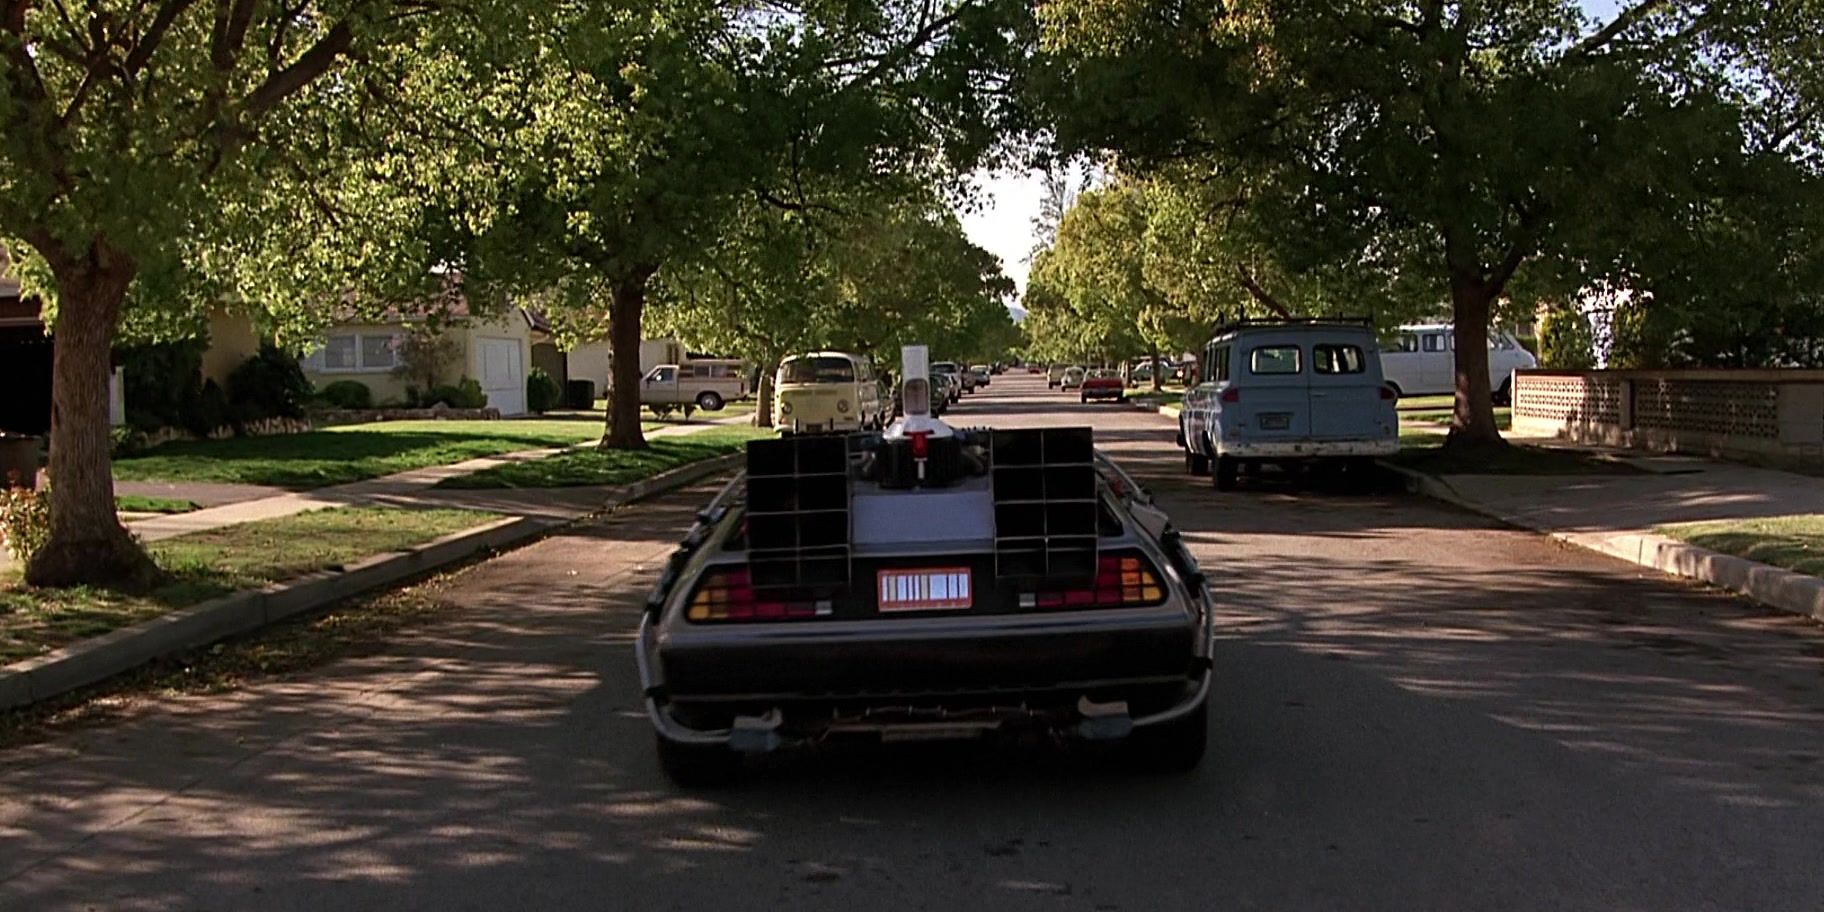 The DeLorean on the road in Back to the Future